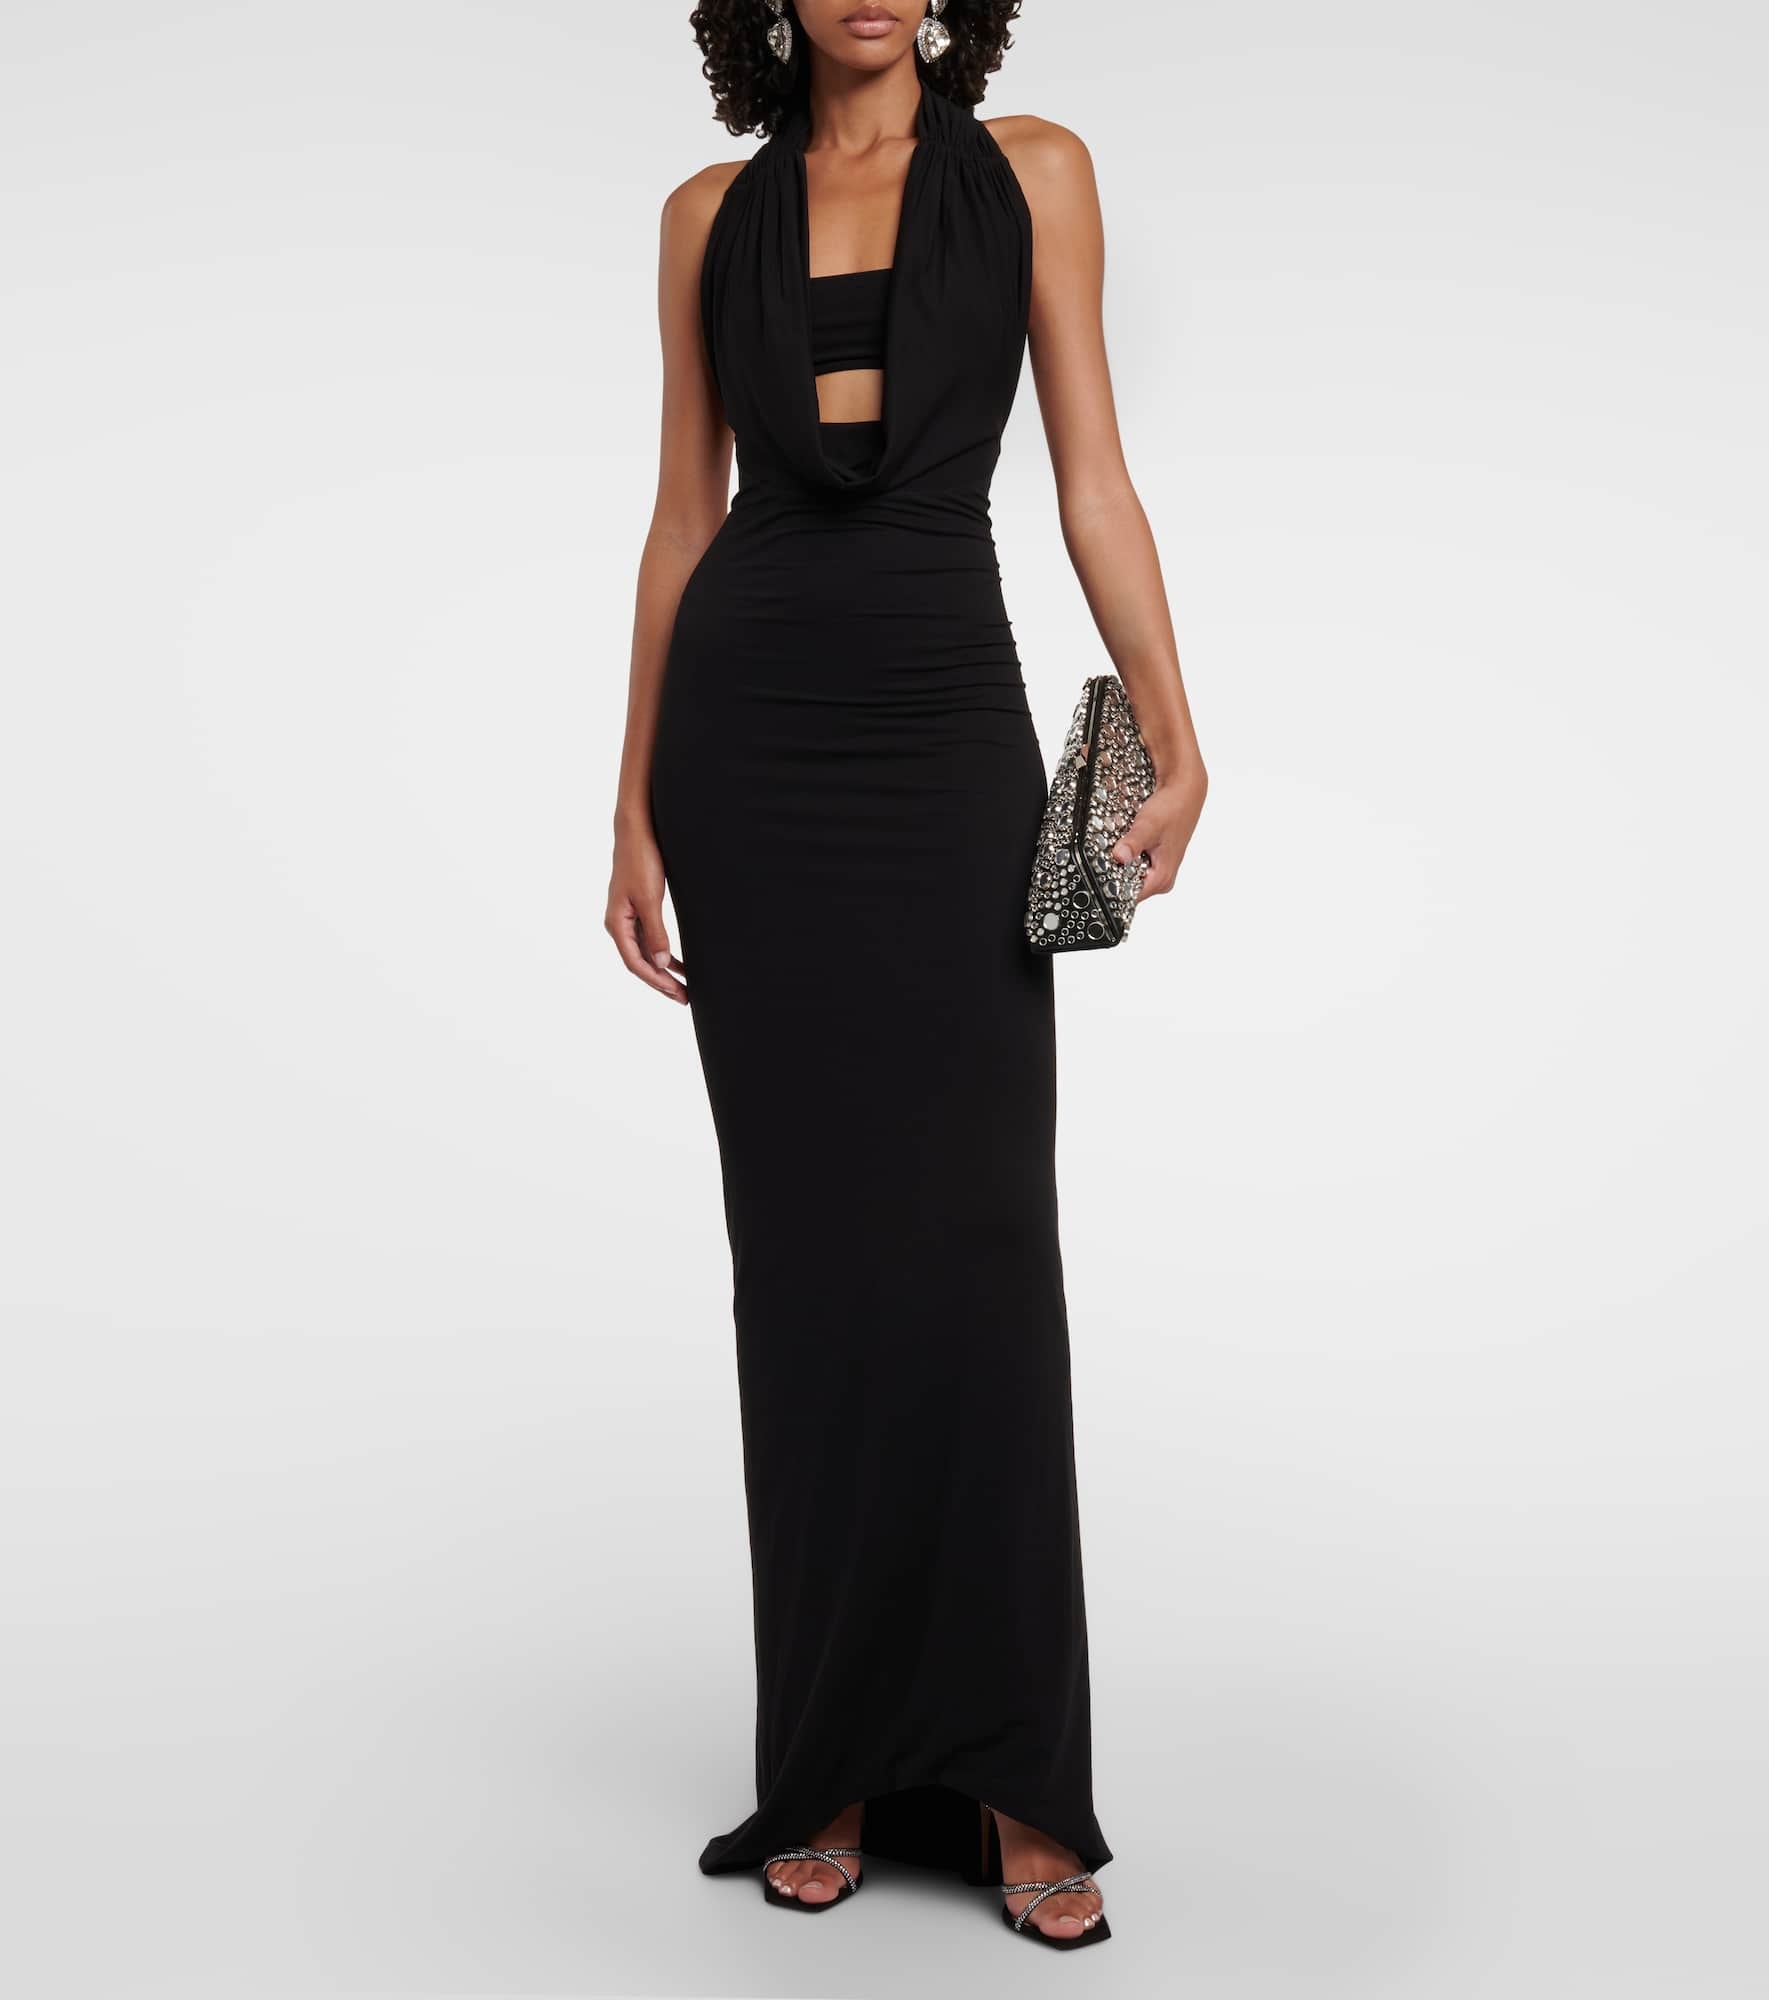 Ruched jersey gown - 2